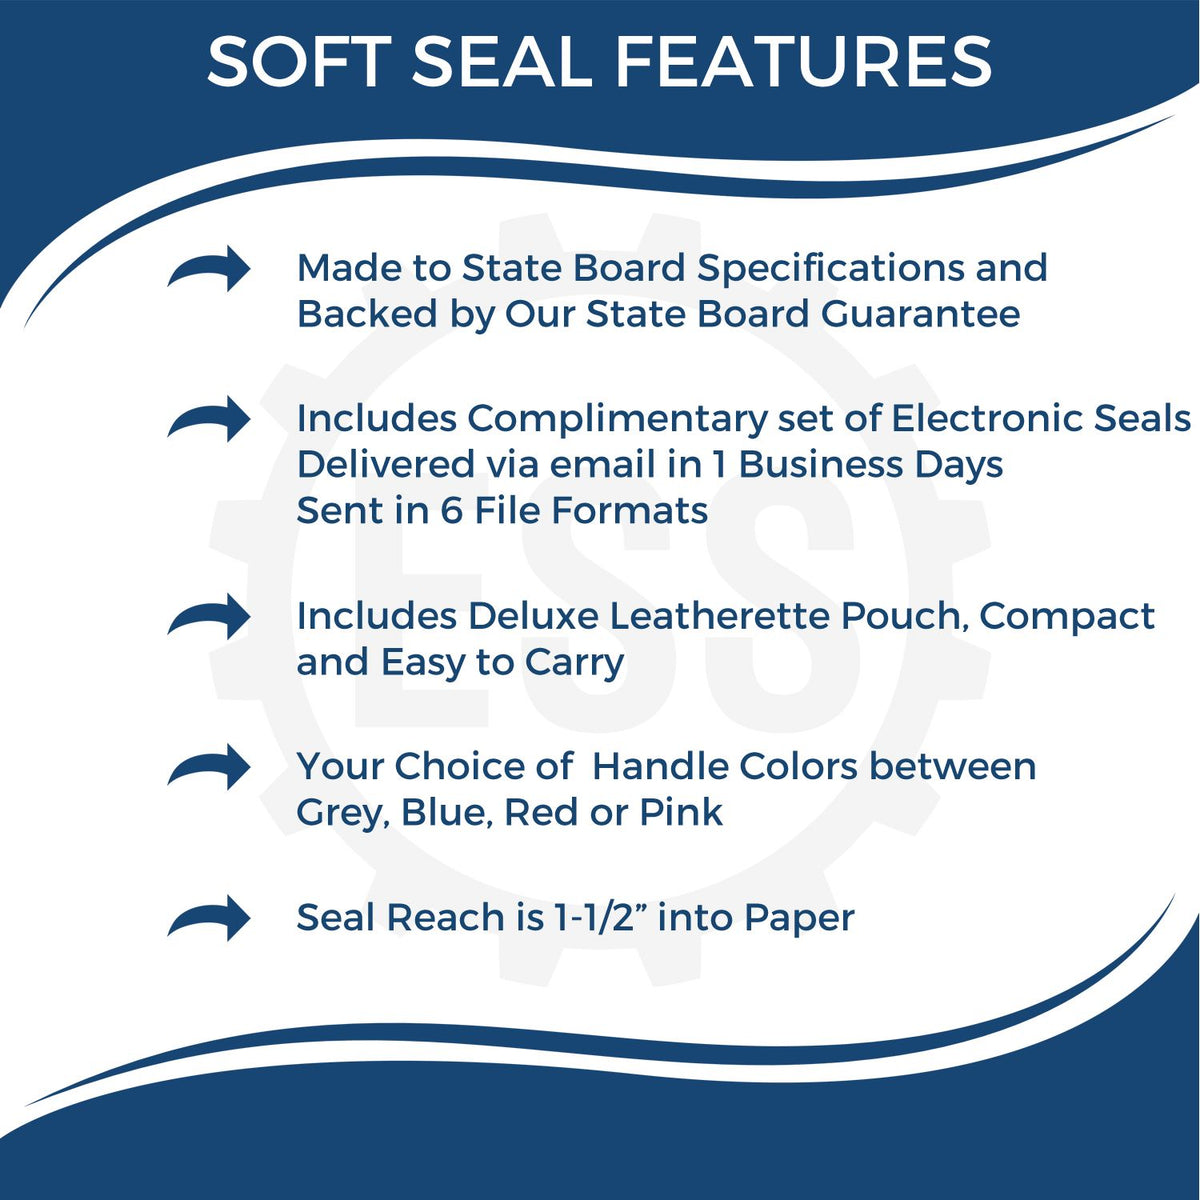 A picture of an infographic highlighting the selling points for the Soft New York Professional Engineer Seal